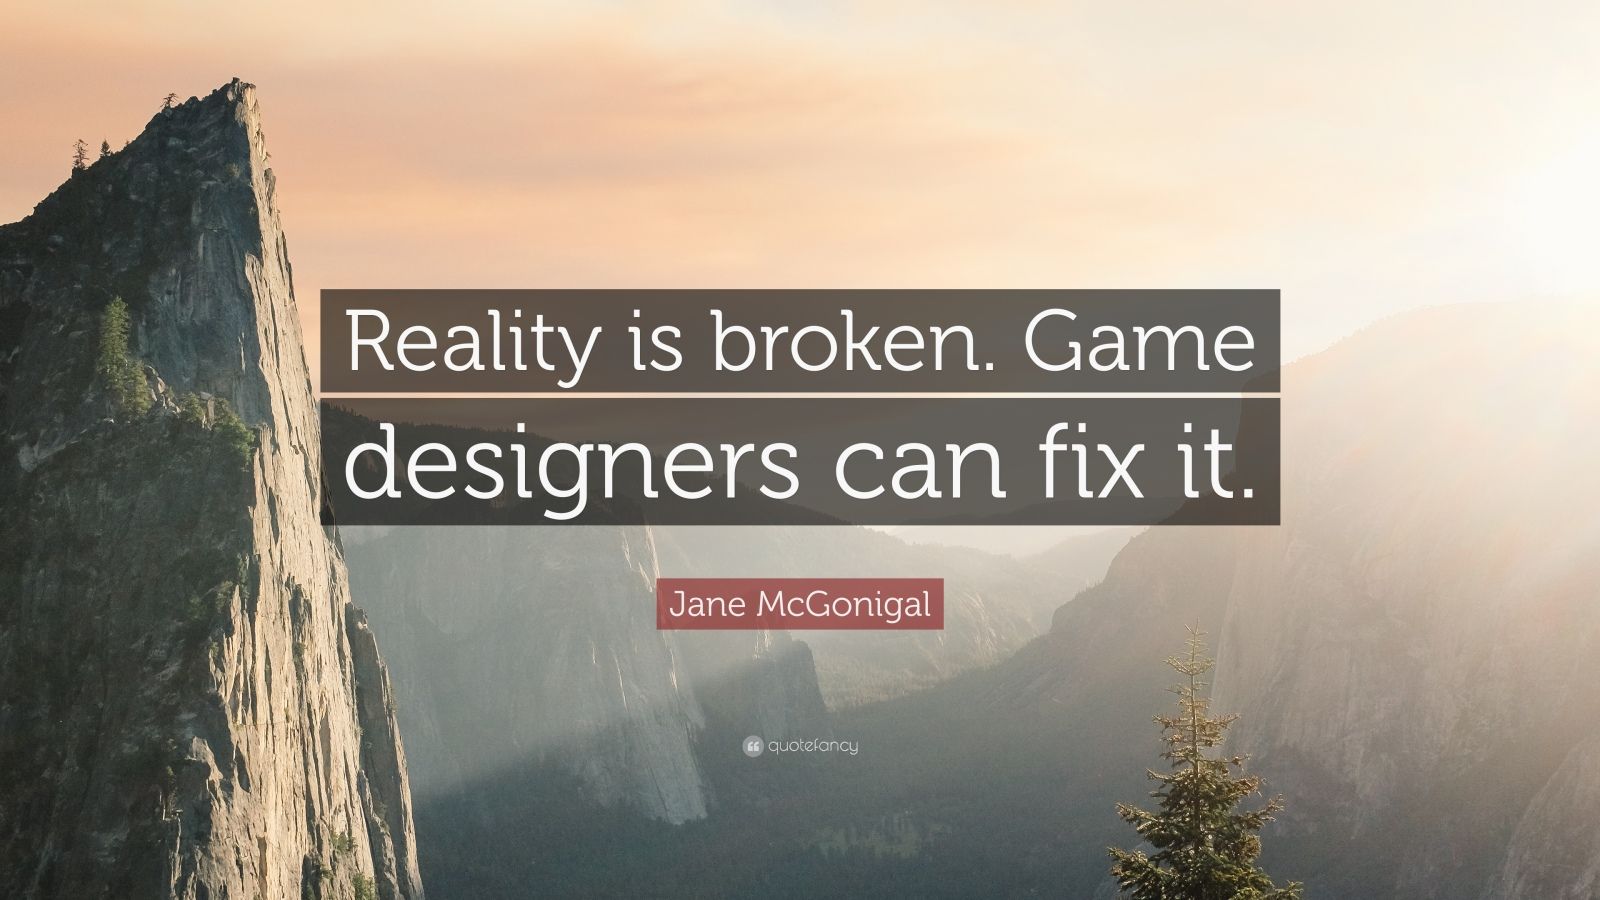 reality is broken by jane mcgonigal